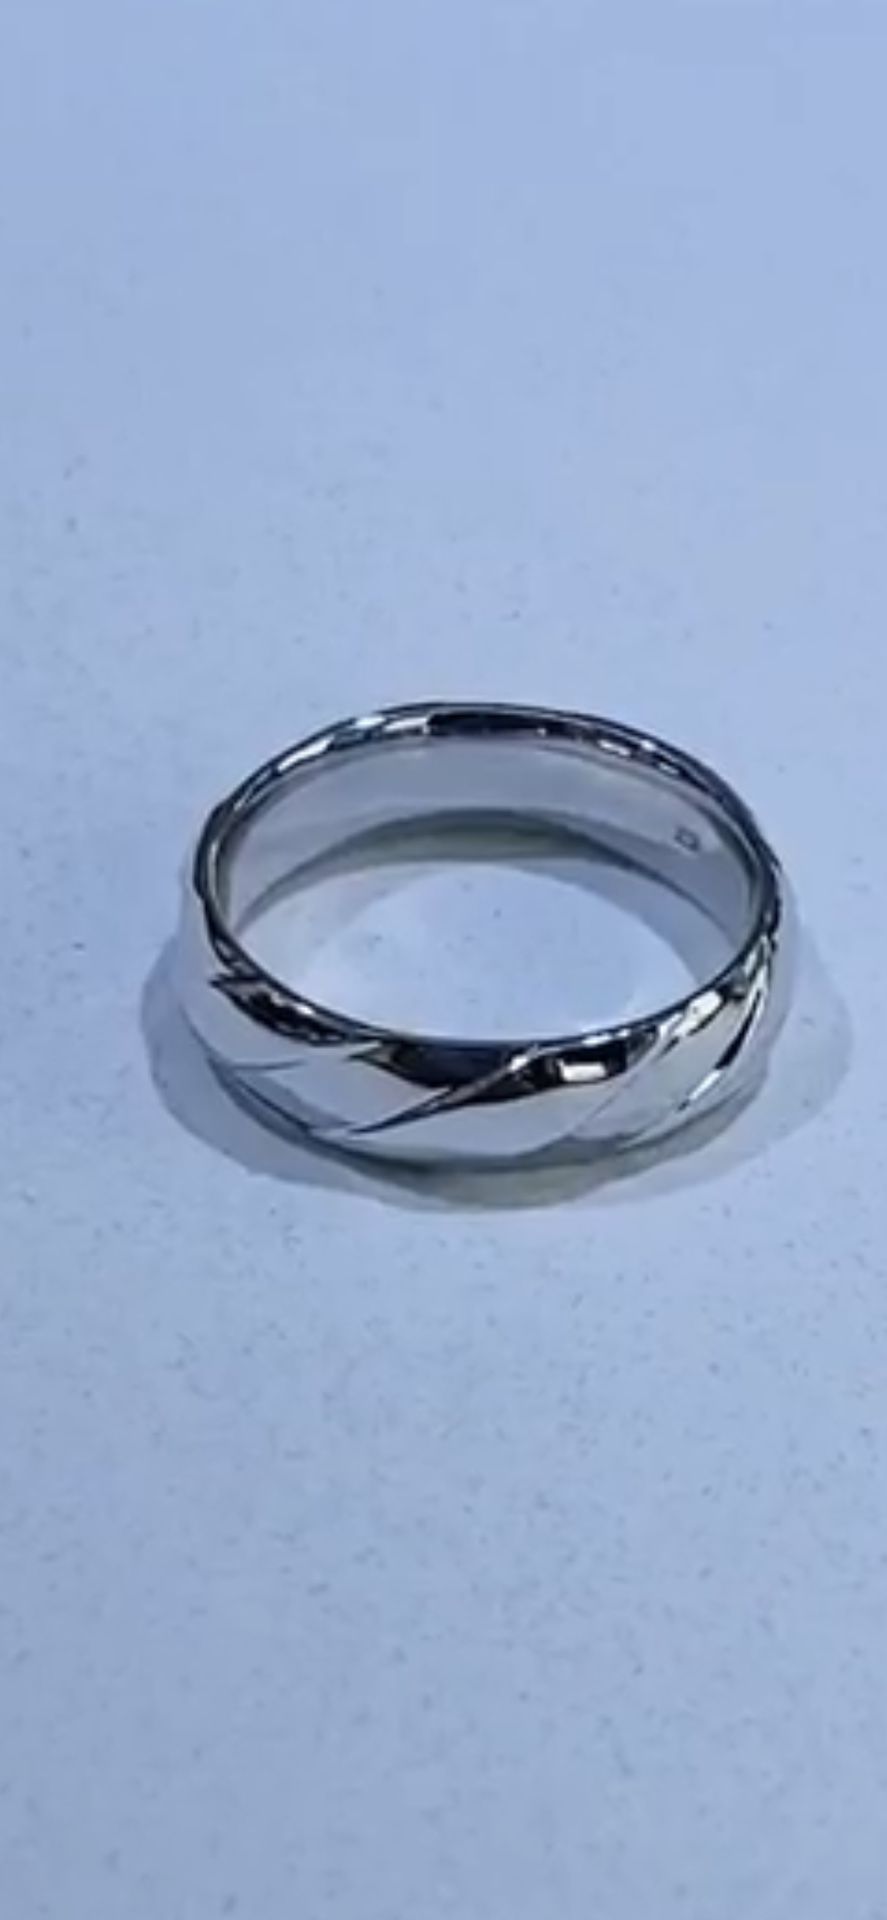 Men’s Wedding Band Size 10.5 For Sale - Never Worn